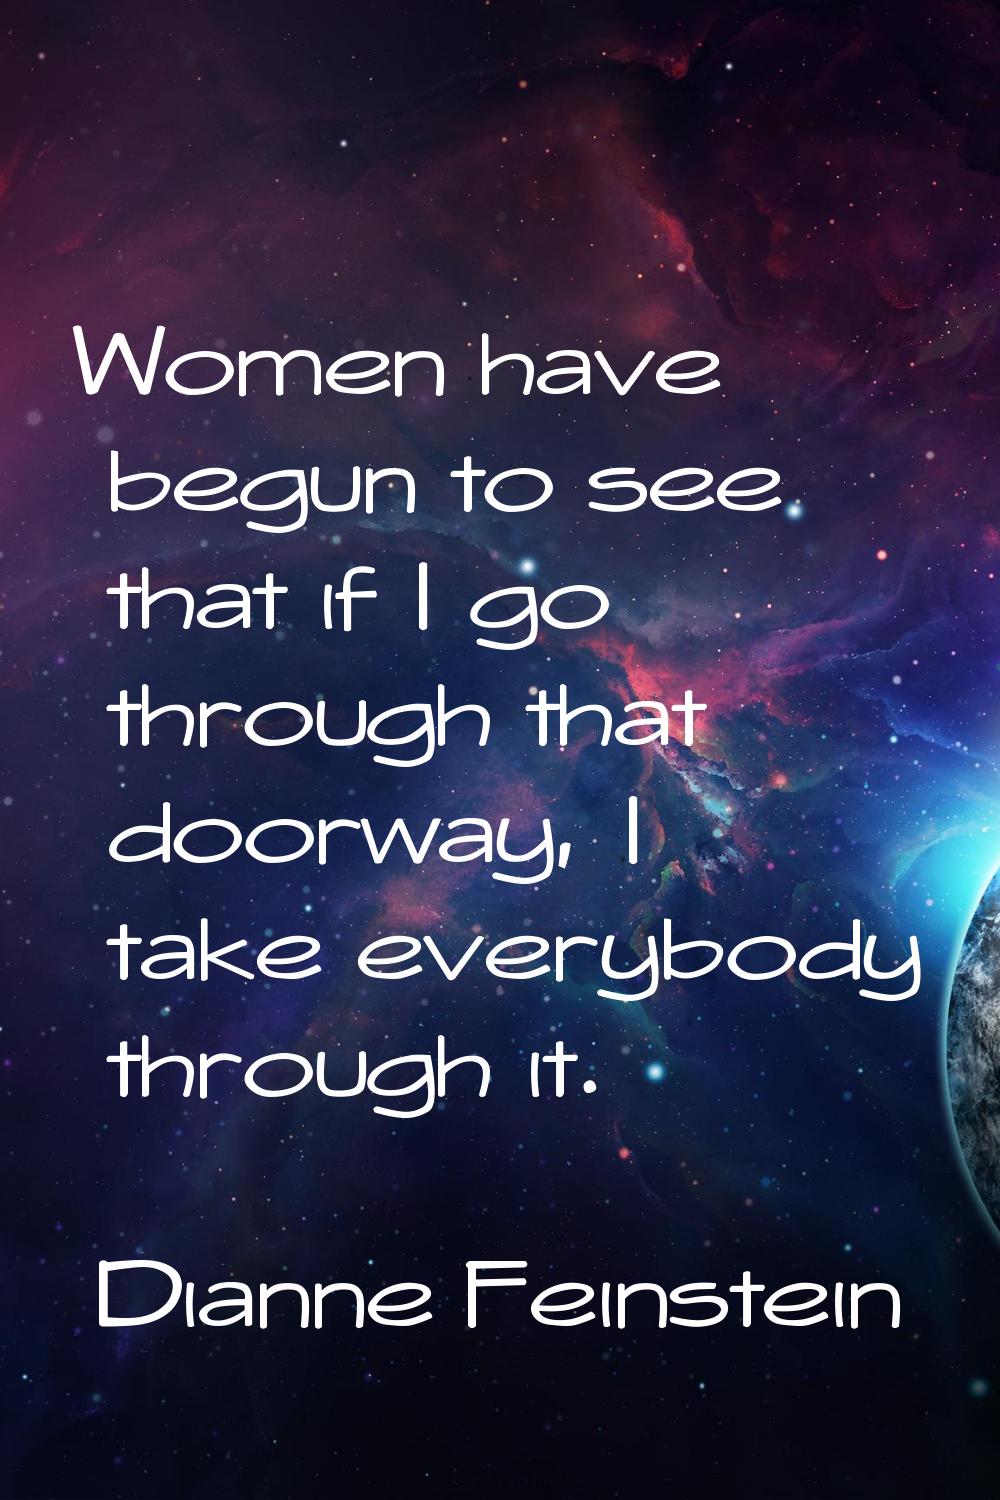 Women have begun to see that if I go through that doorway, I take everybody through it.